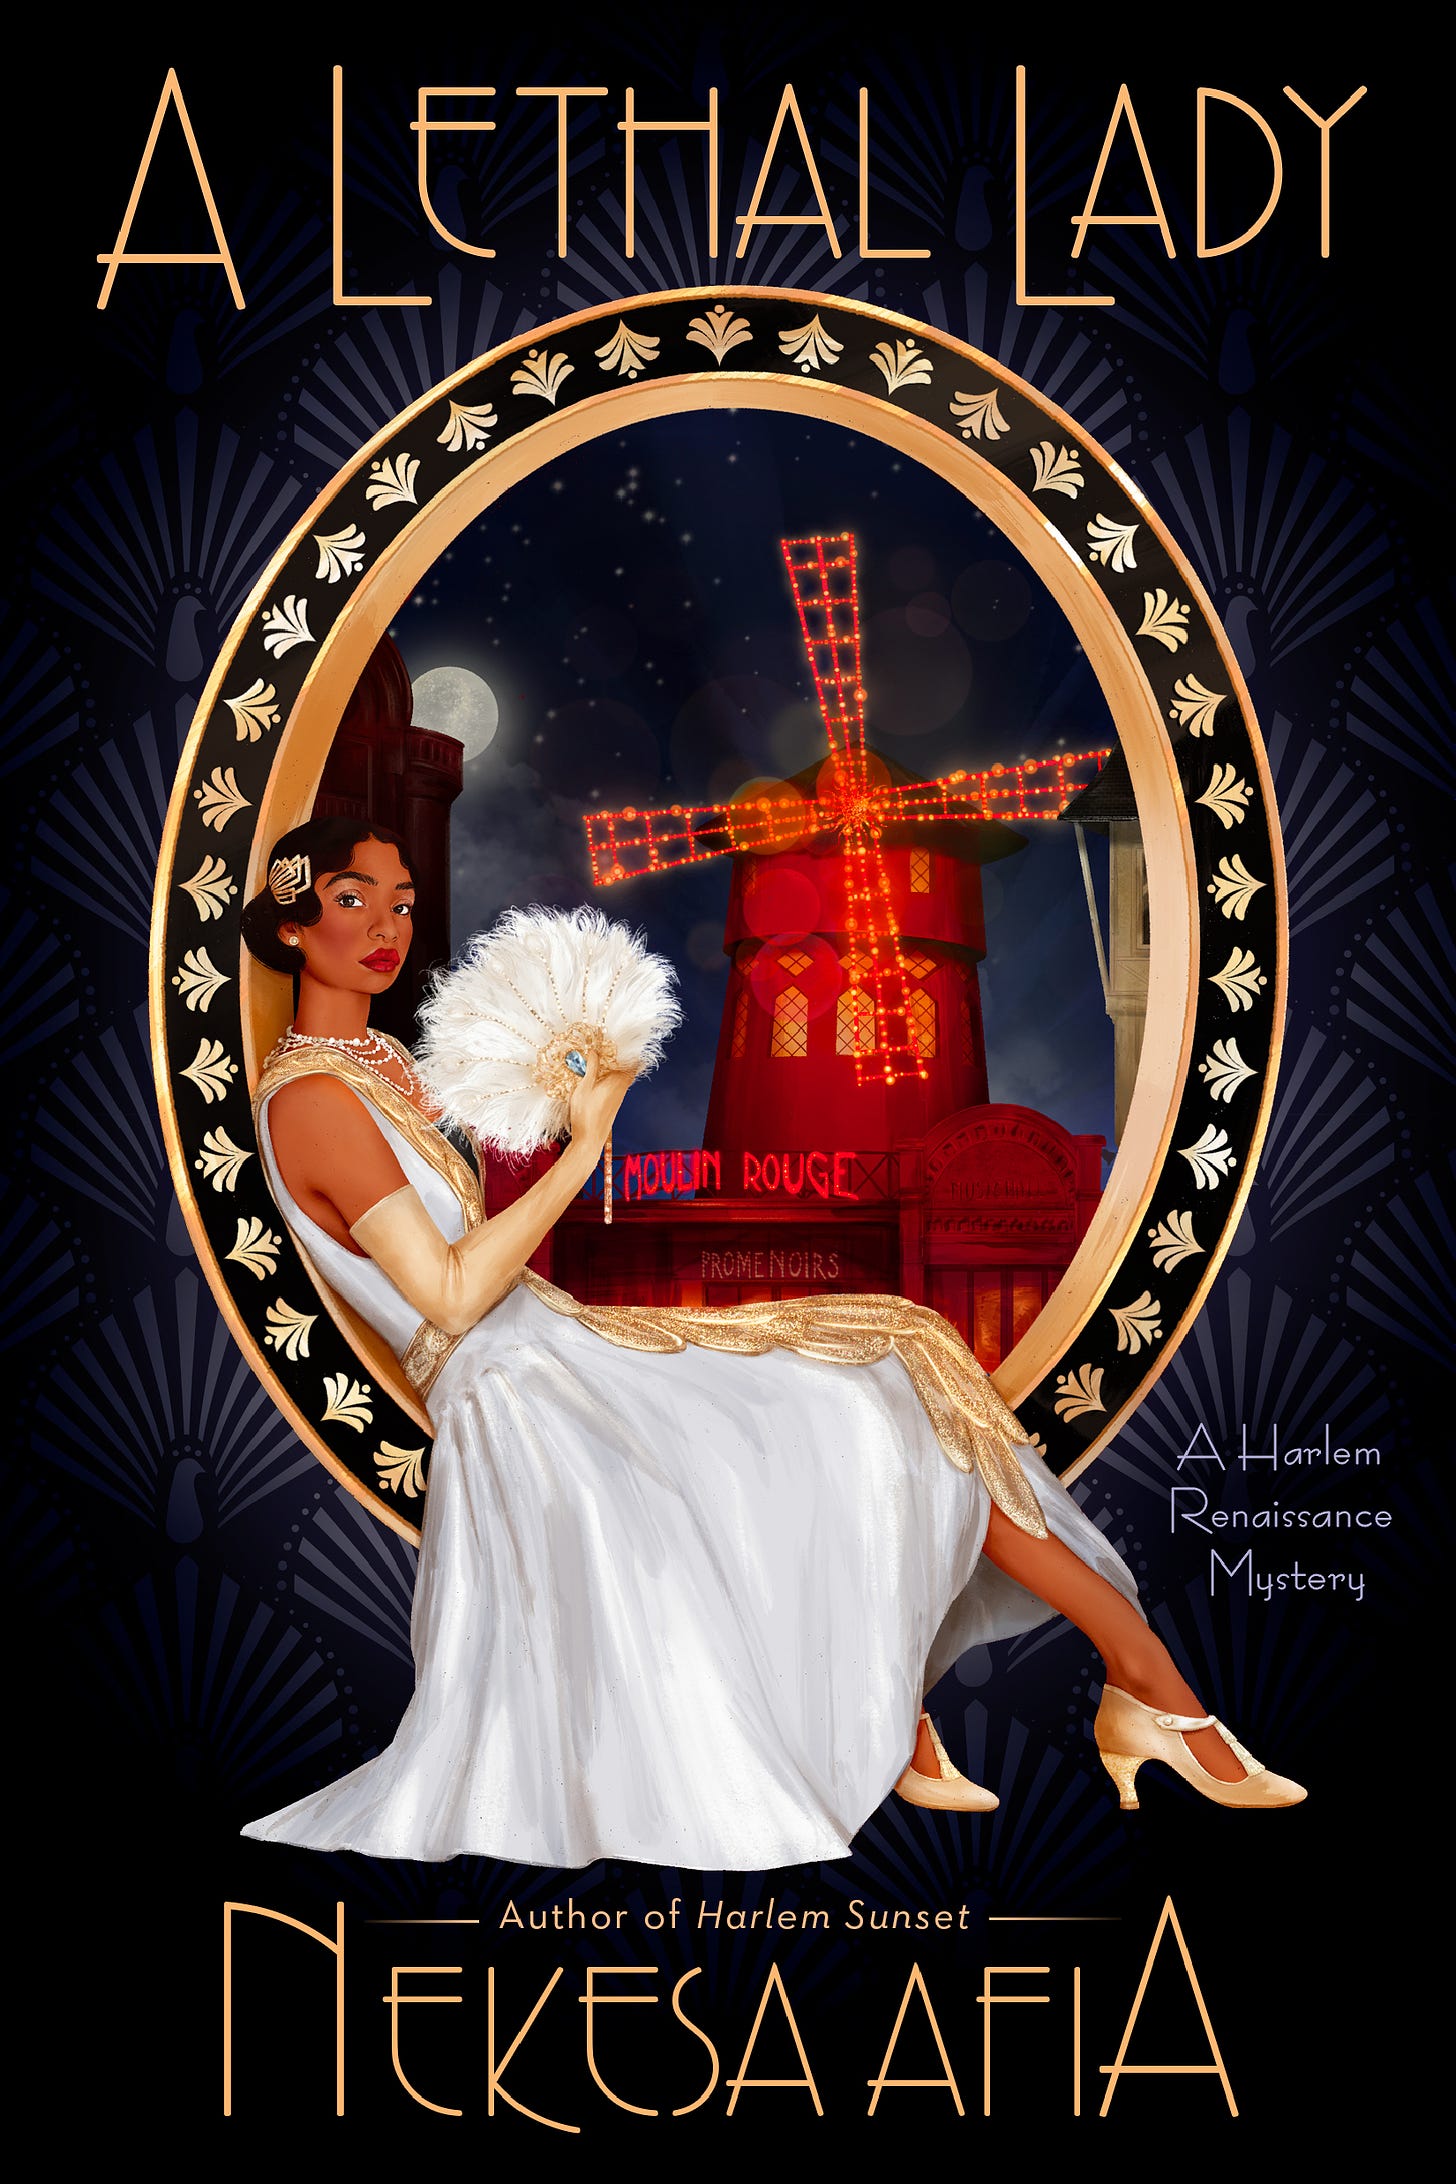 (Navy blue background with illuminated peacocks. A Black woman wearing a white dress and holding a white feathered fan glares at the reader. She is sitting at the bottom of an oval, and behind her is the Moulin Rouge.)